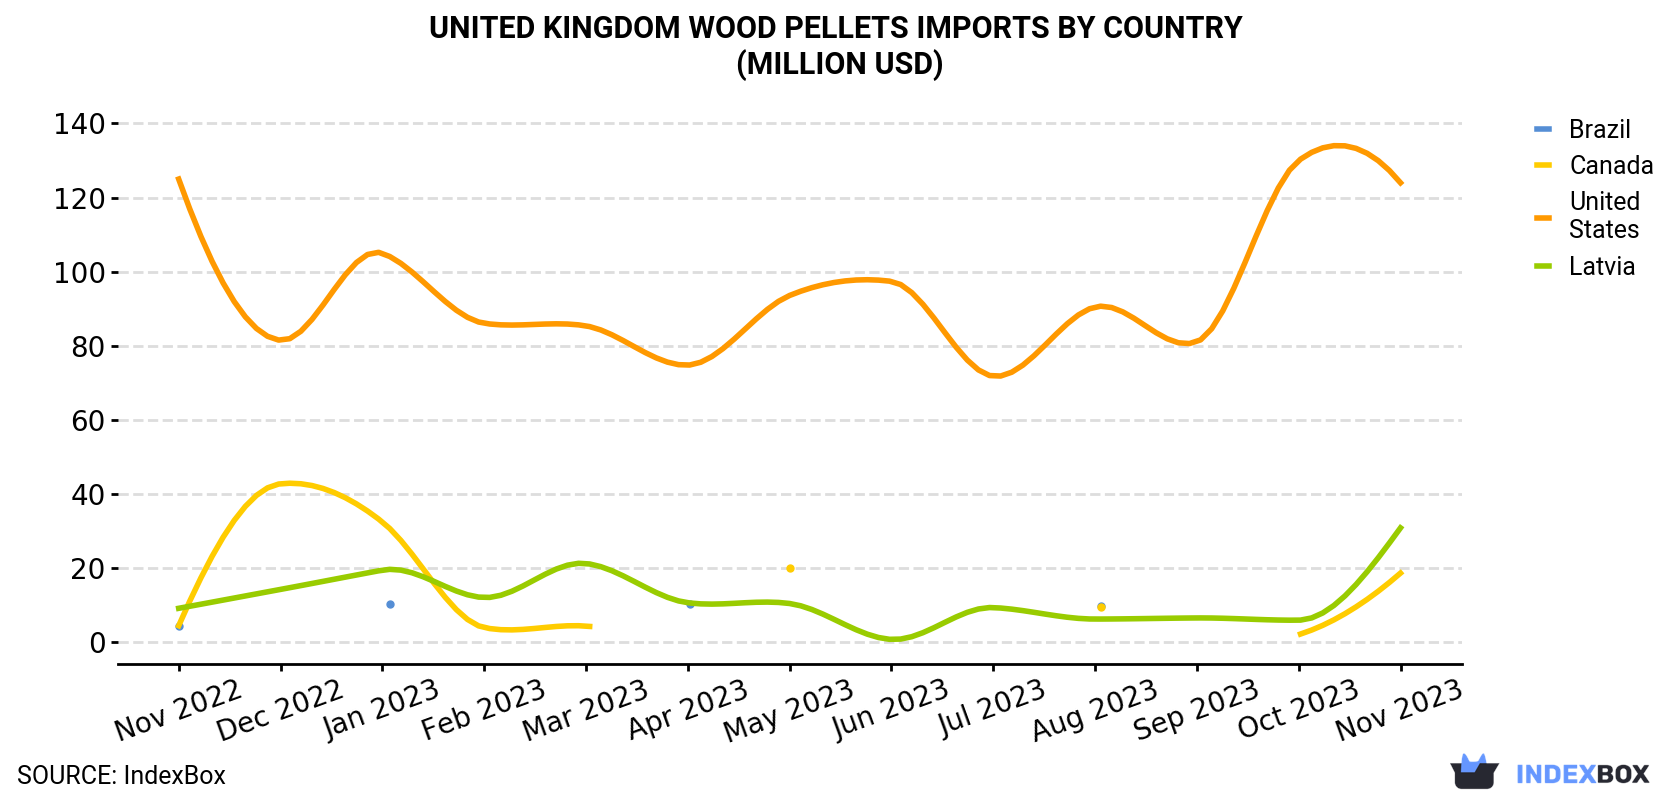 United Kingdom Wood Pellets Imports By Country (Million USD)